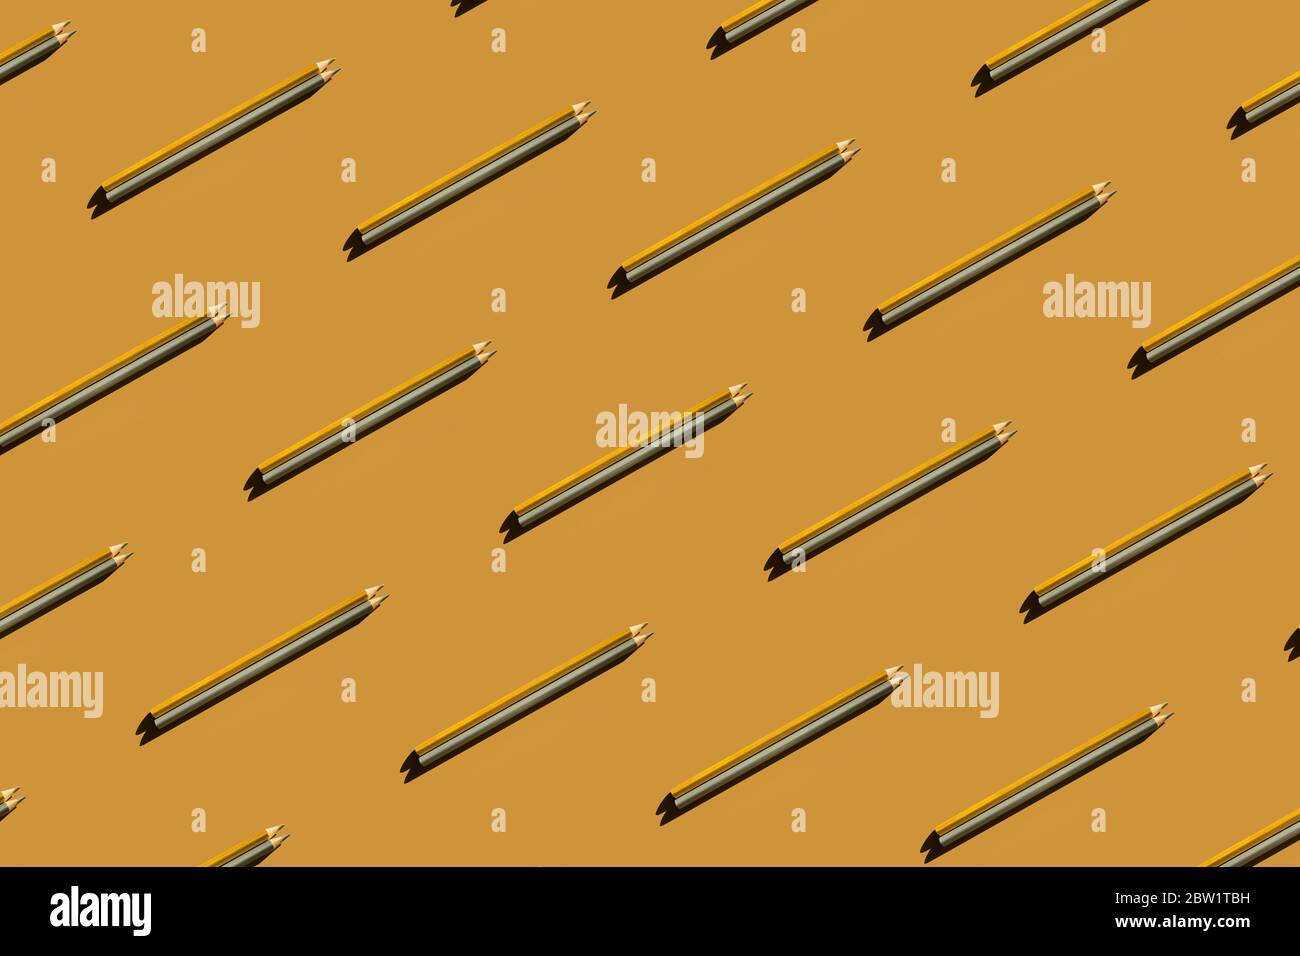 Pattern of trendy gold and silver pencils on gold background. Back to school, education and learning concept. Minimal modern concept. Stock Photo